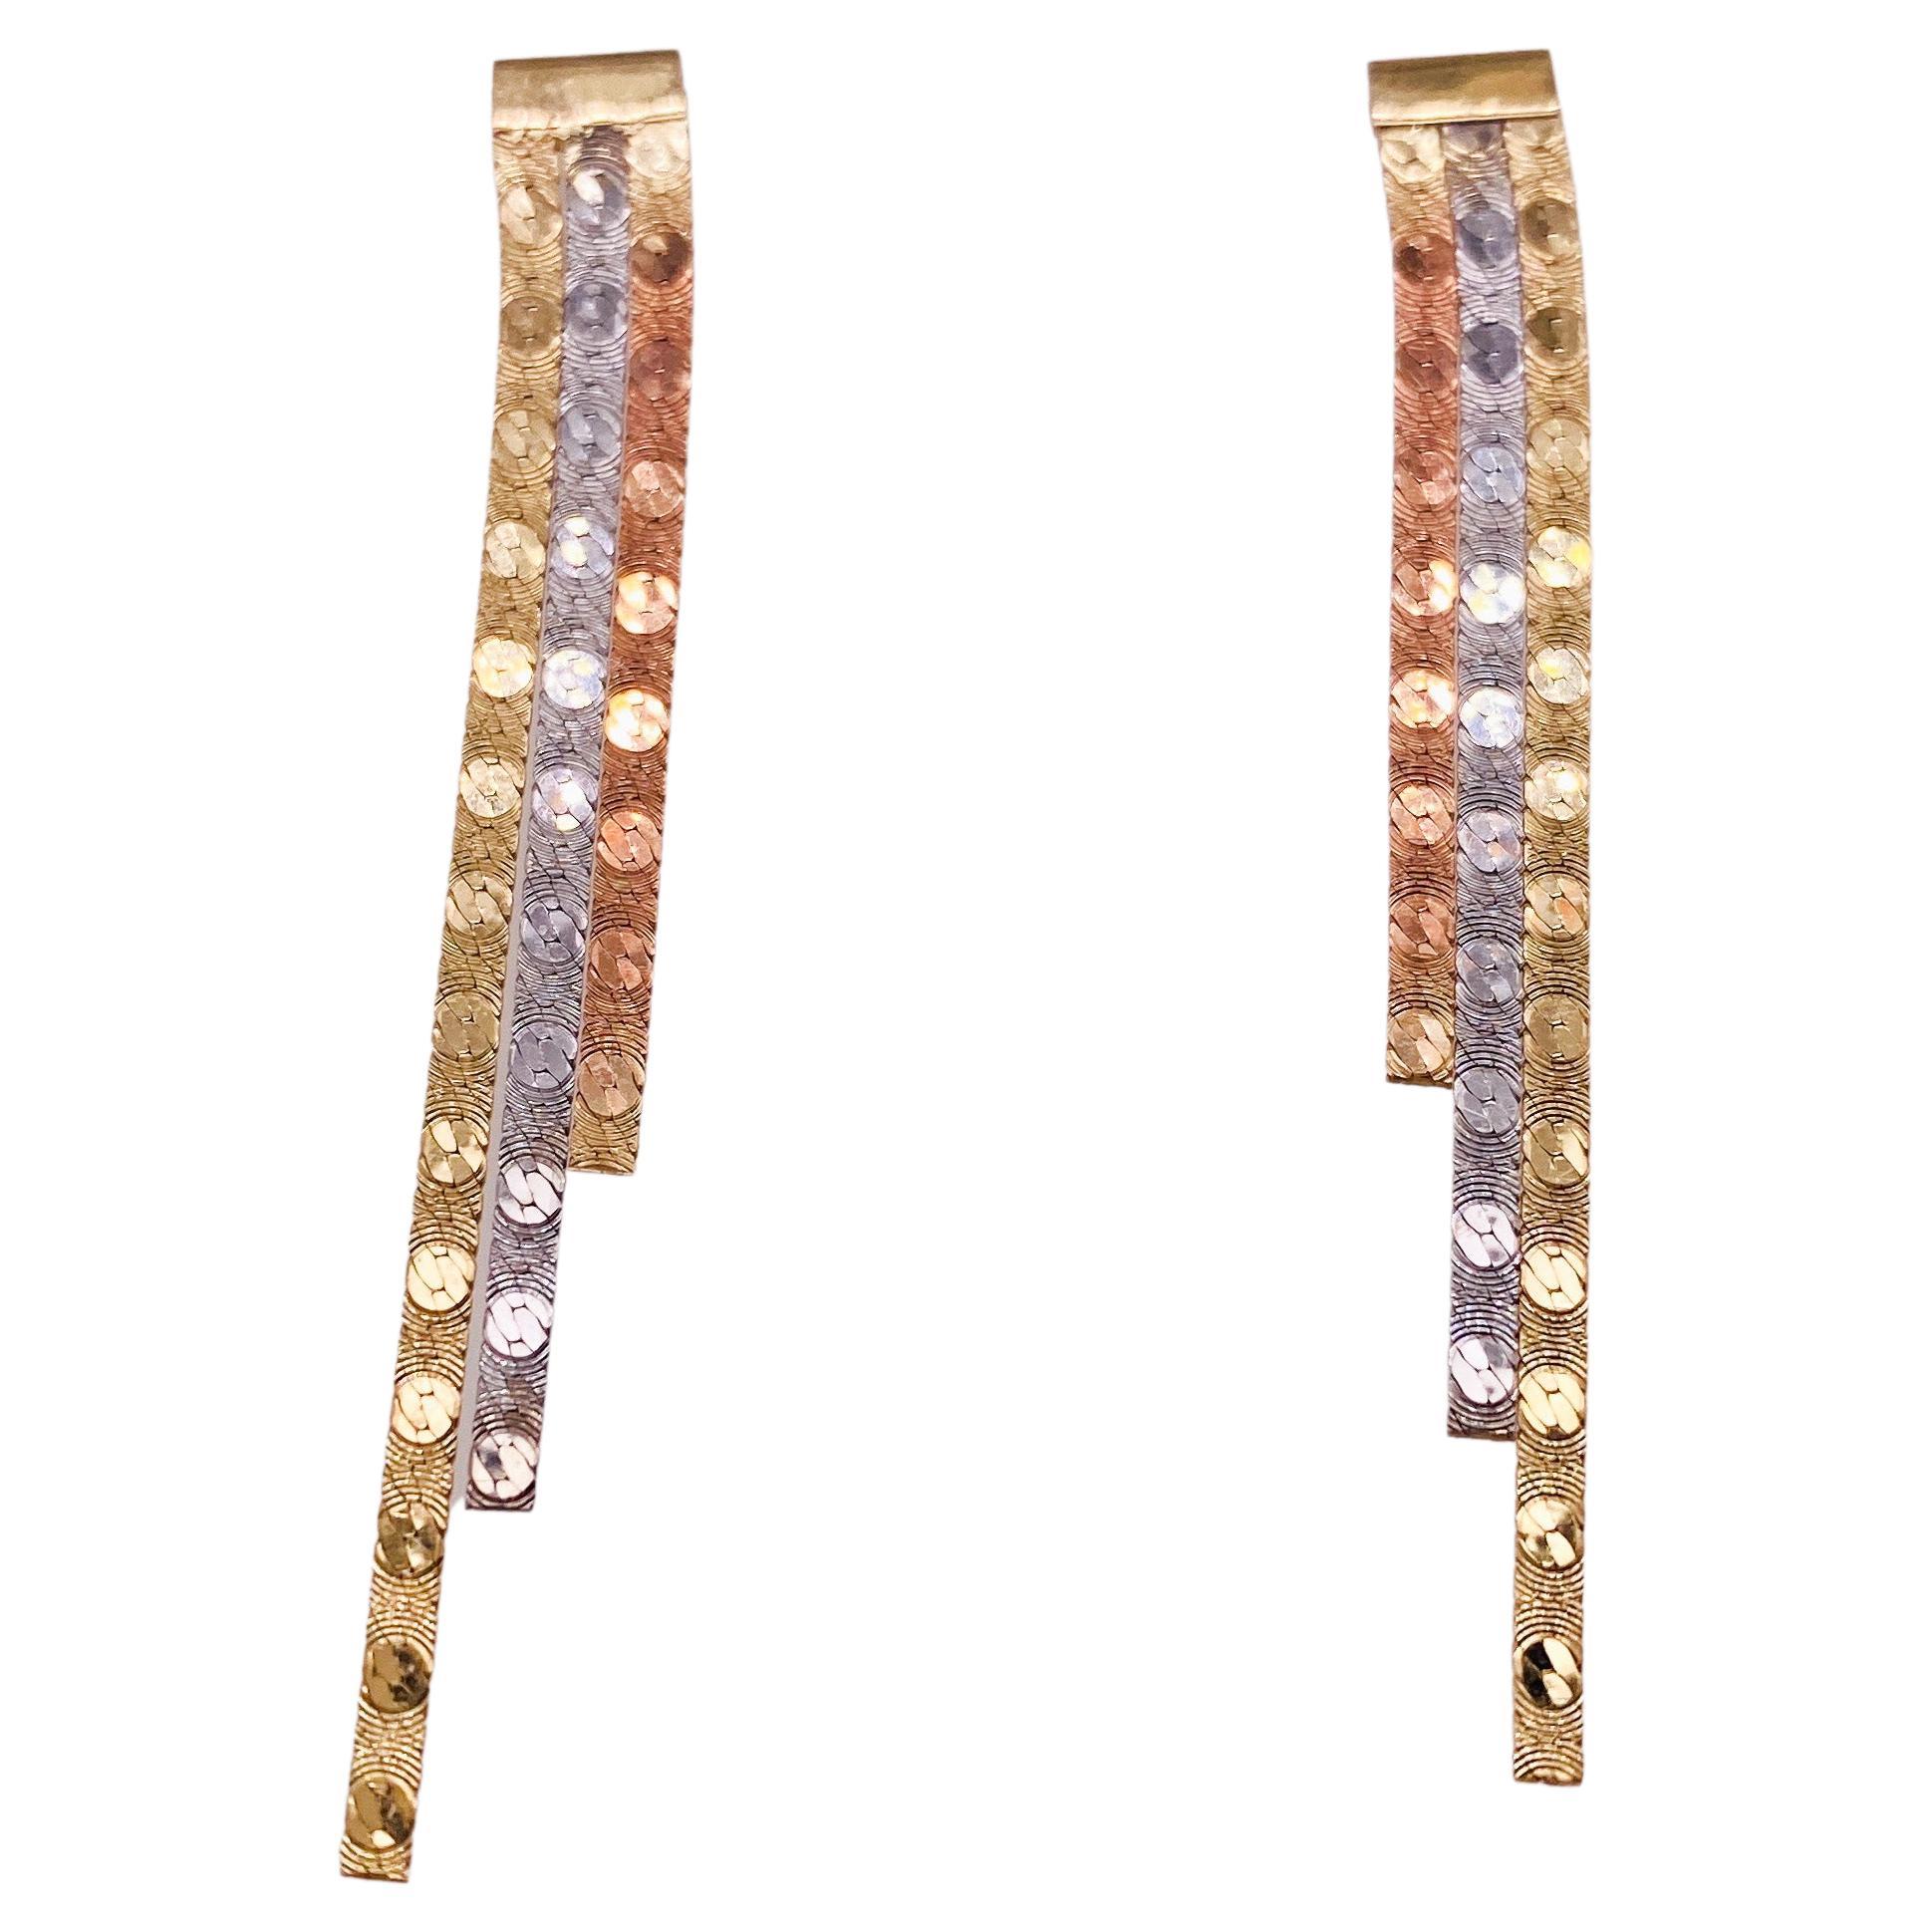 Mixed Metal Earrings Tri-Color Herringbone Drops 1.25-2 Inches 14K Gold Chains For Sale